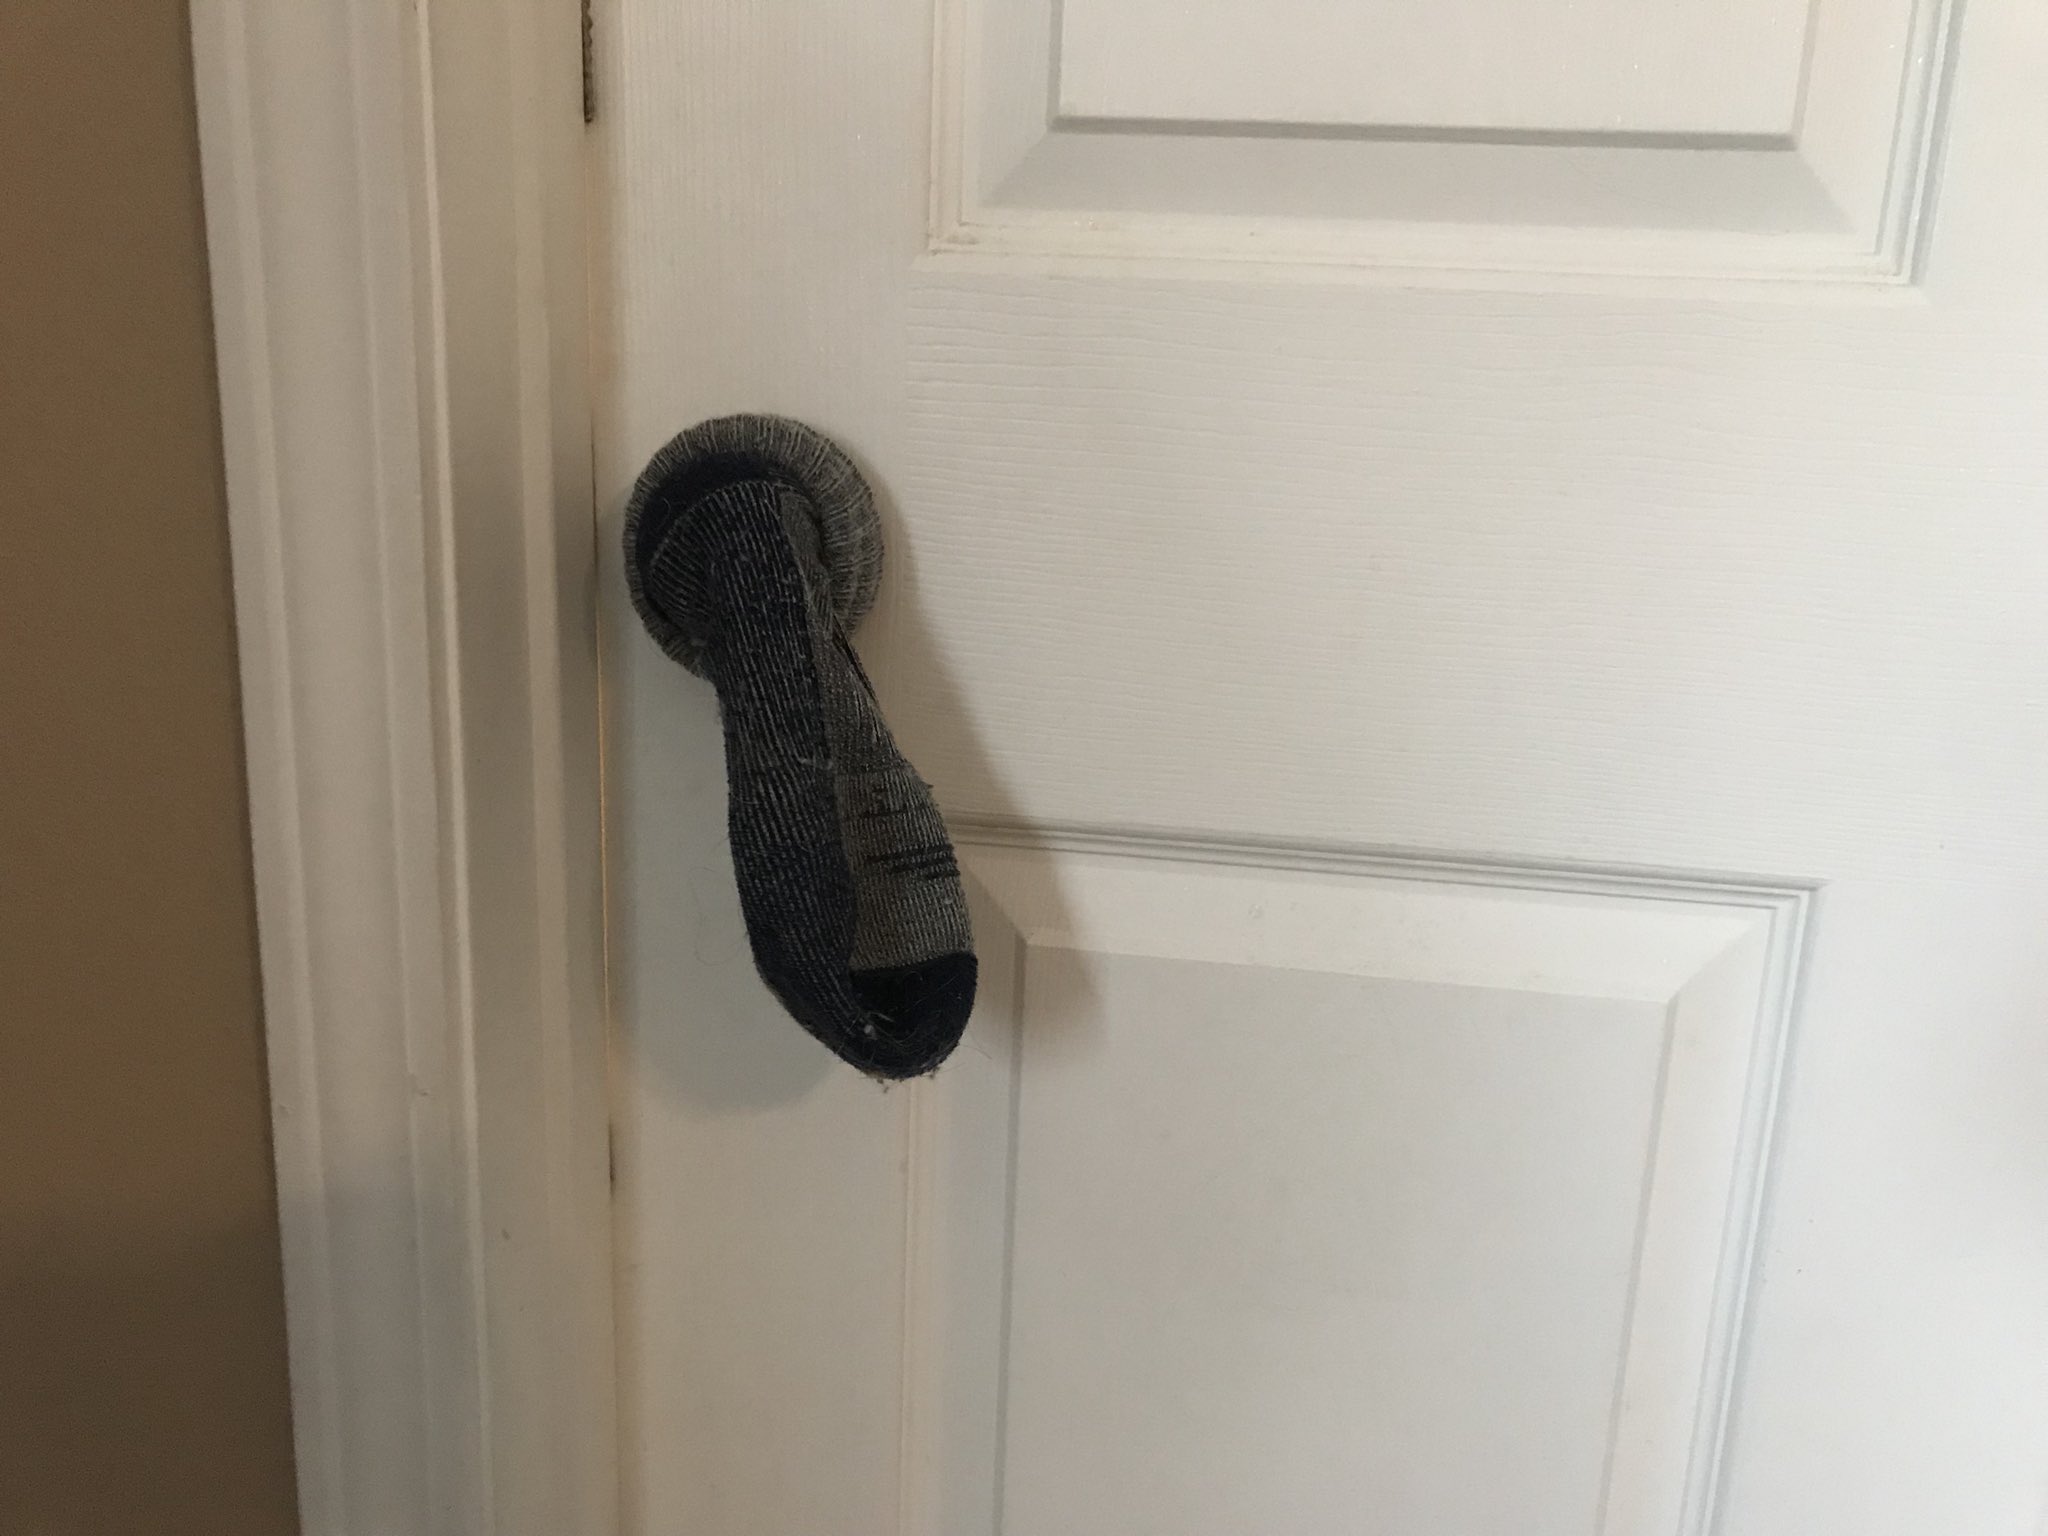 The Surprising Secret Behind Putting A Sock On The Door Knob